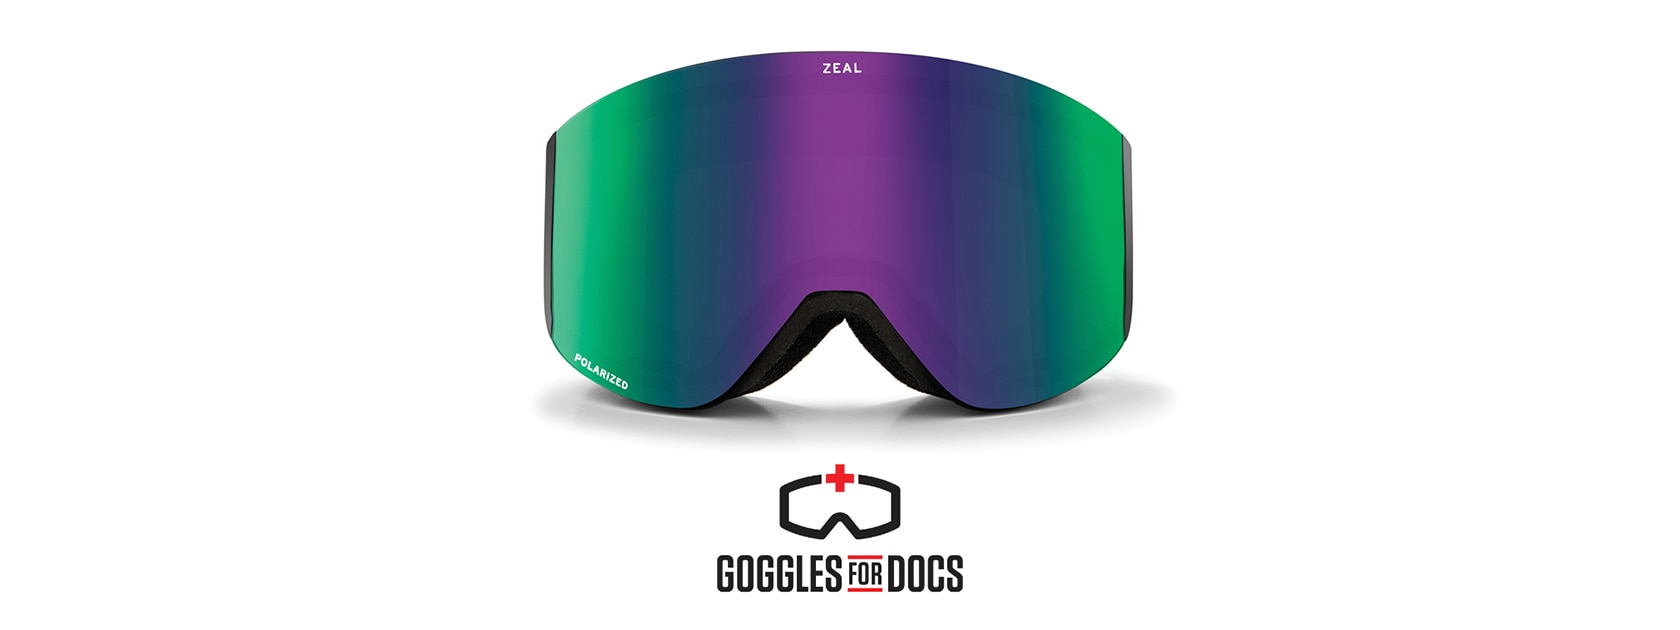 image of Zeal goggles on a white background above a Goggles For Docs logo